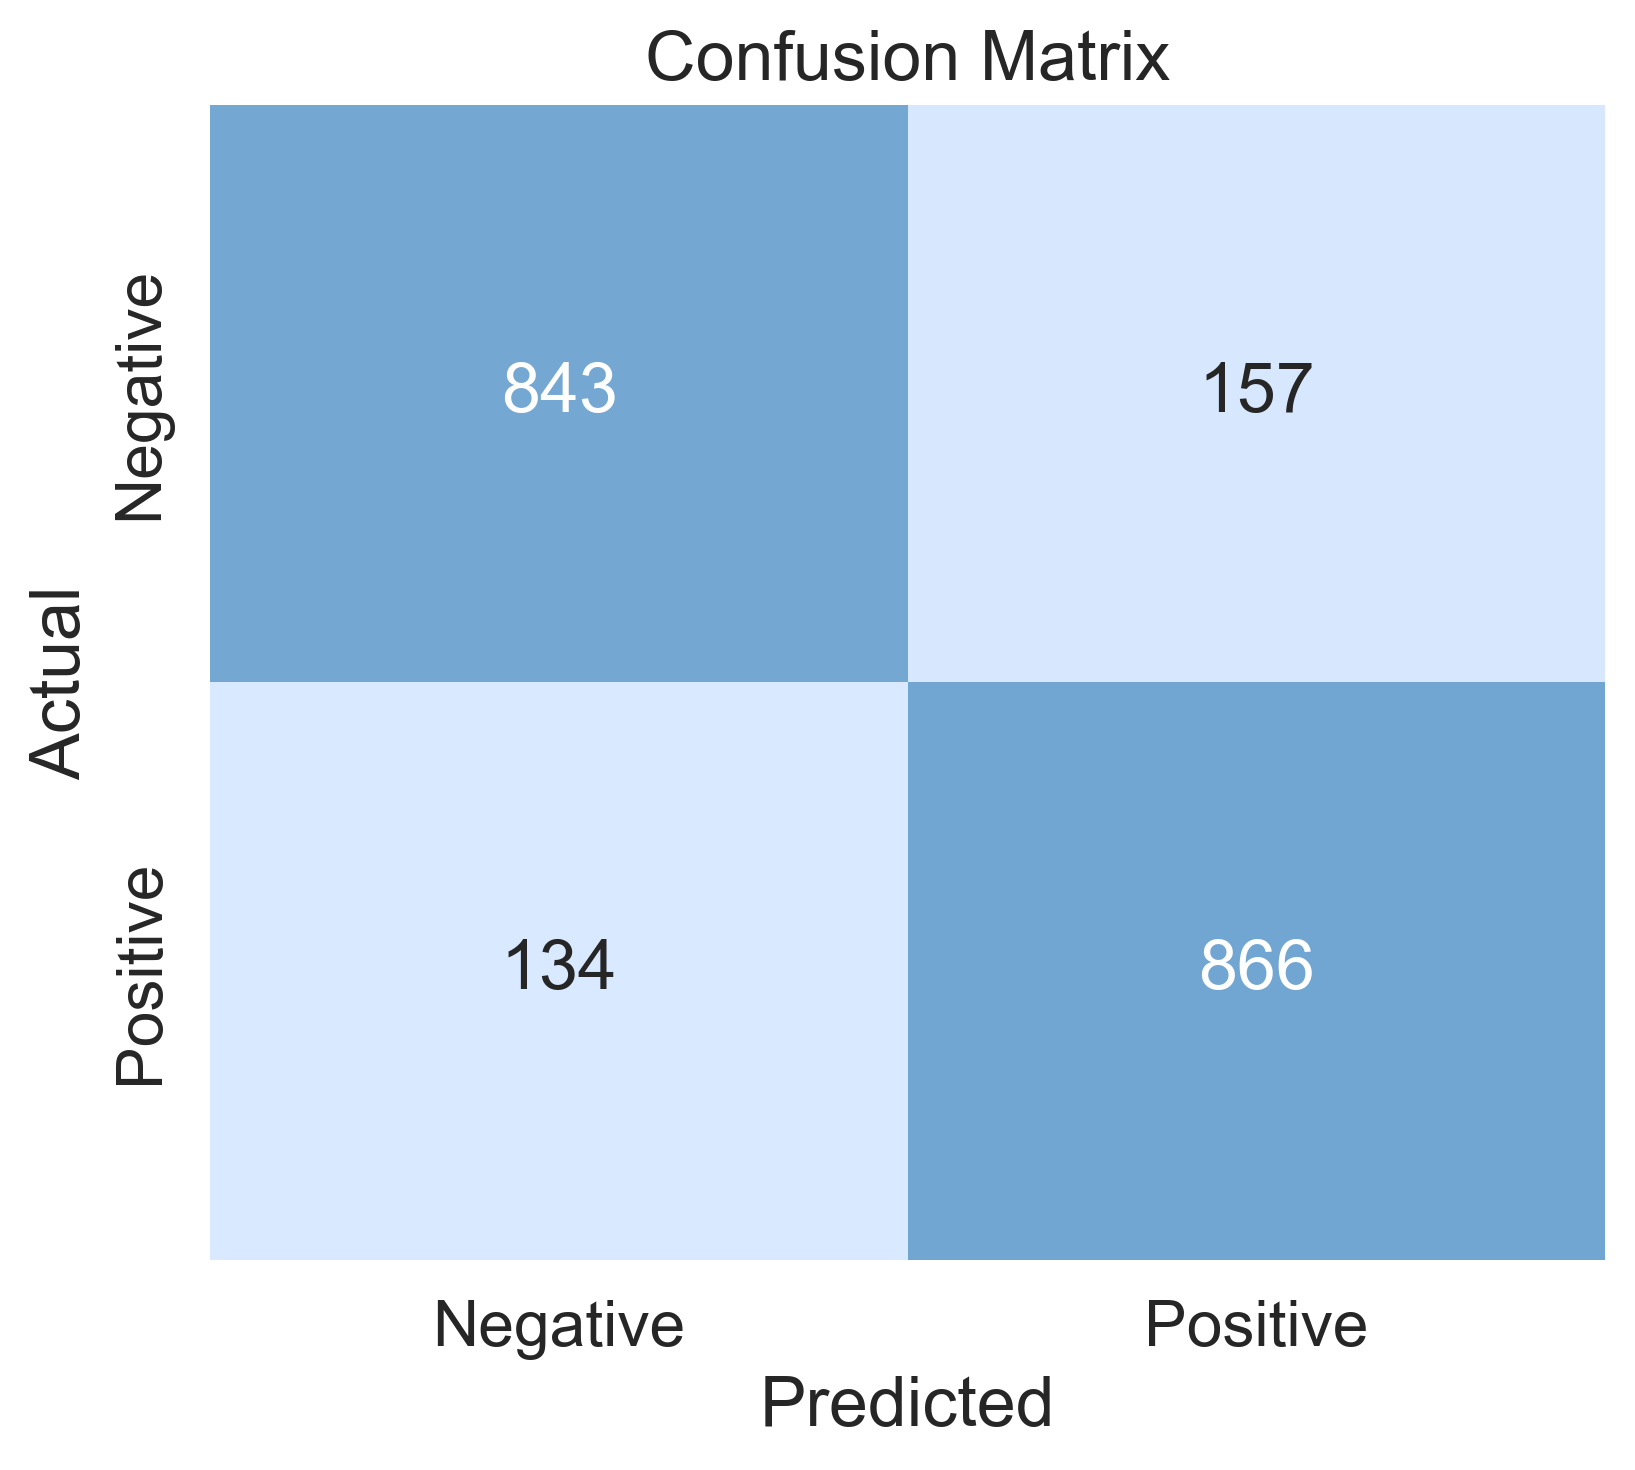 The confusion matrix for the whale sound classification function